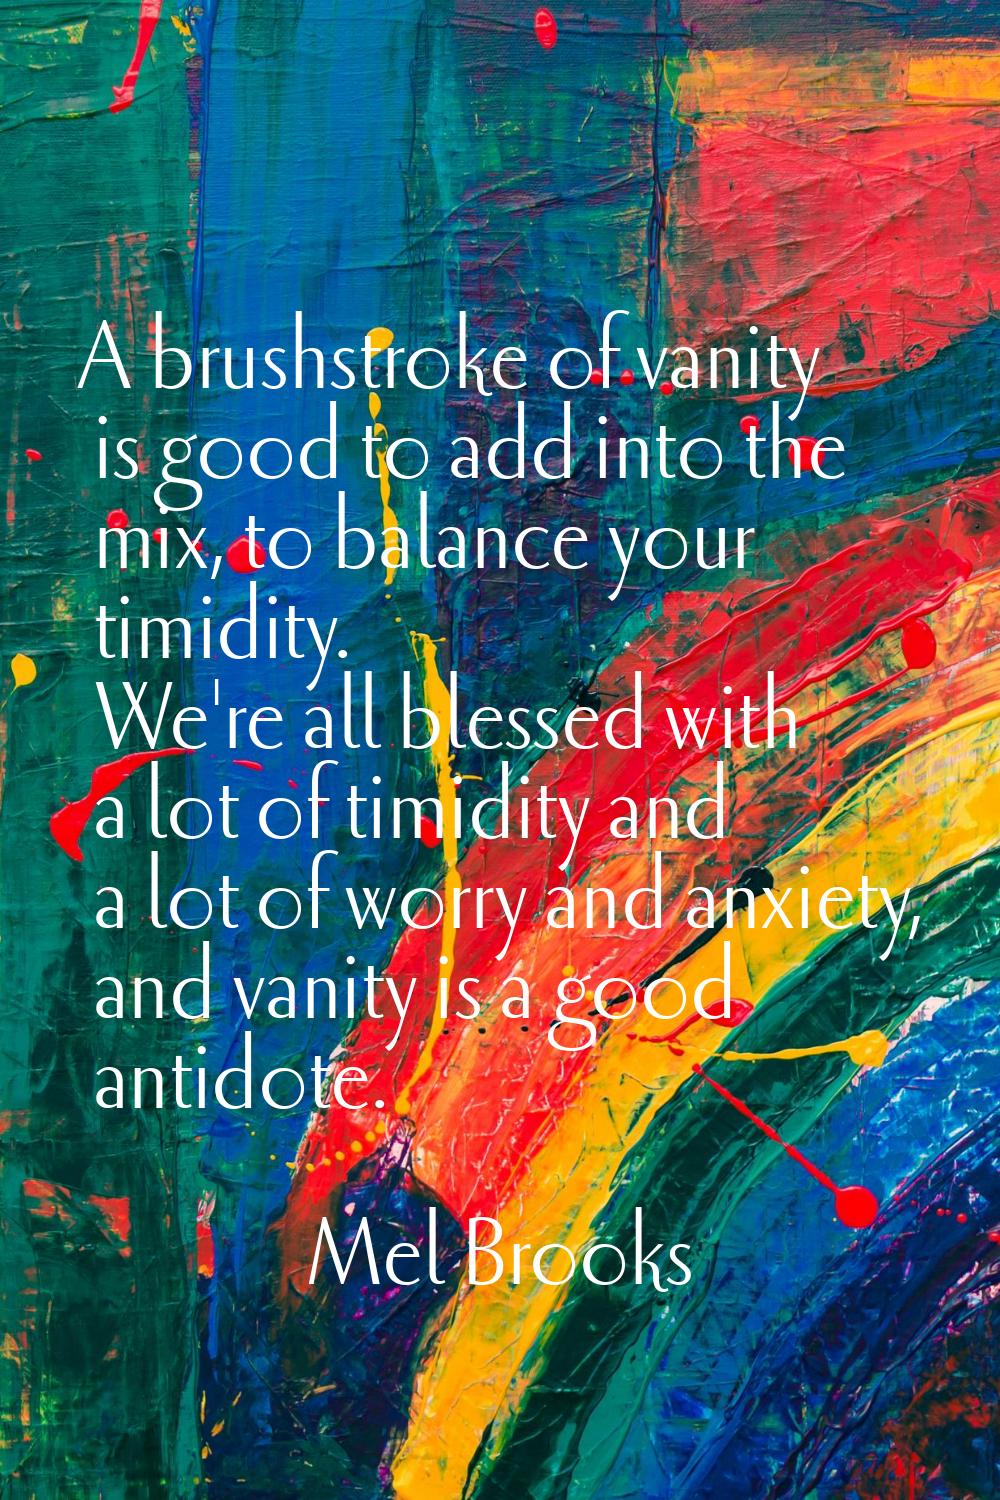 A brushstroke of vanity is good to add into the mix, to balance your timidity. We're all blessed wi